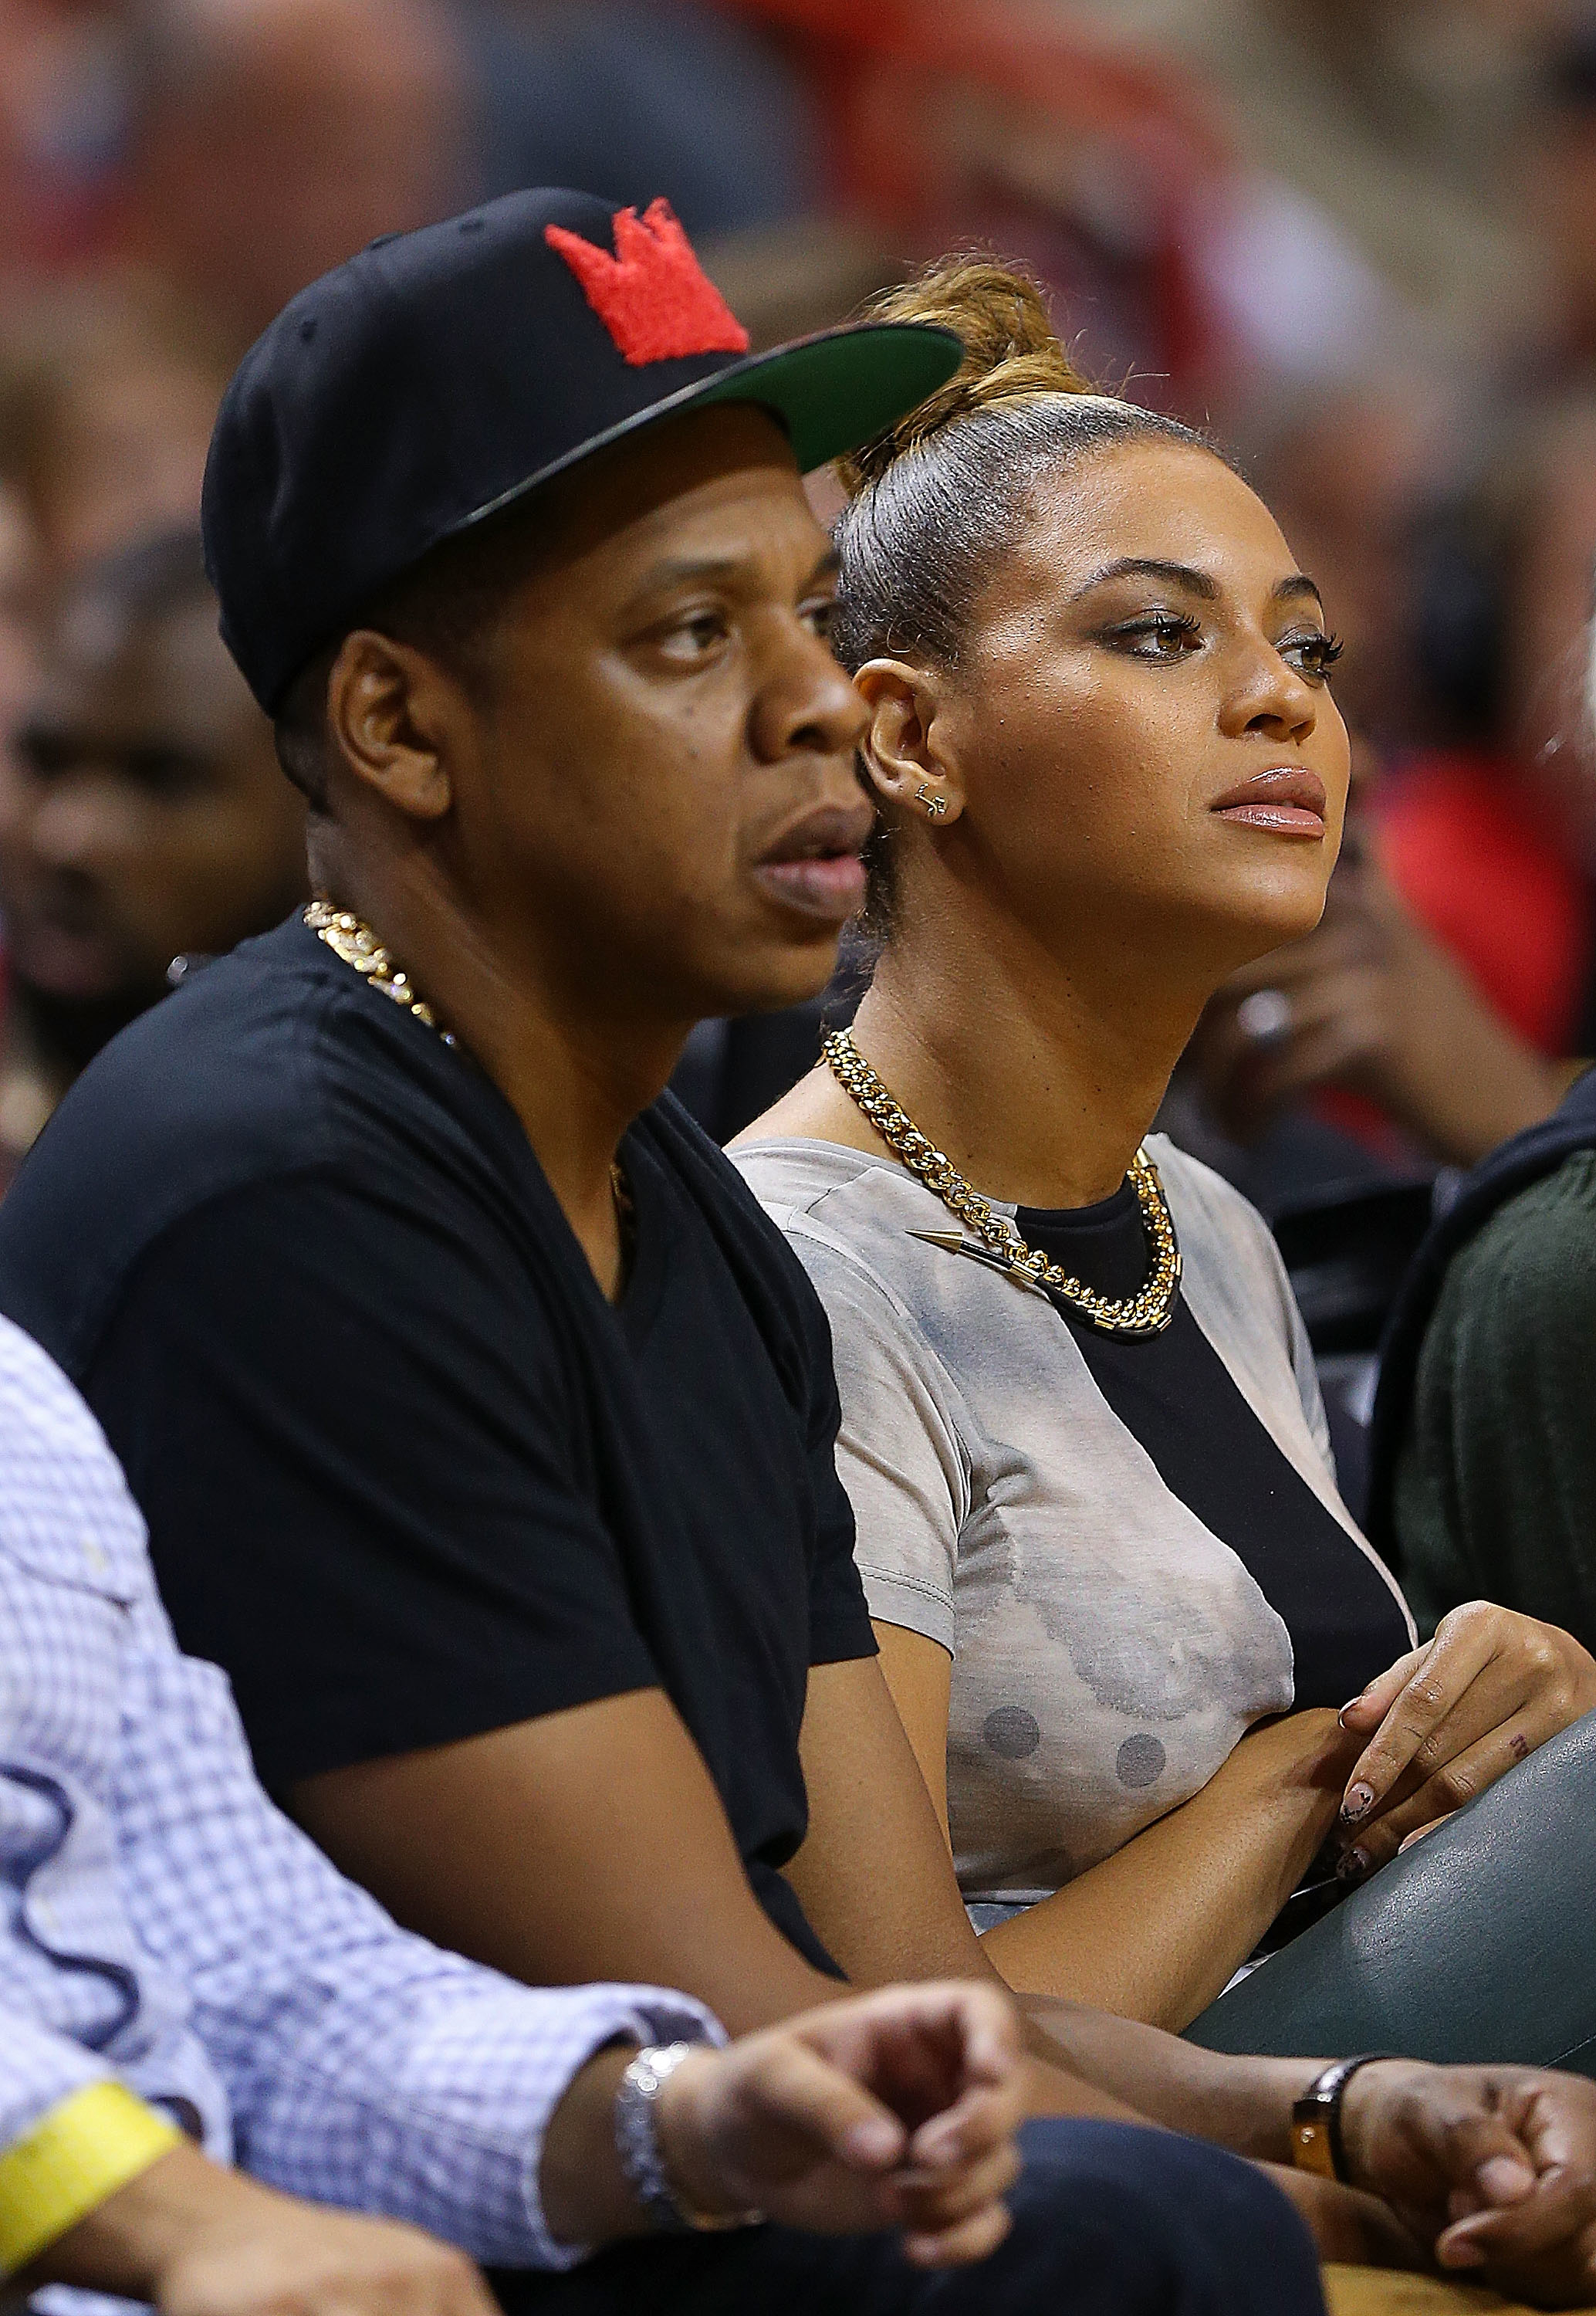 Jay-Z and Beyoncé sitting courtside at a basketball game. Jay-Z wears a black cap and Beyoncé sports a chain necklace